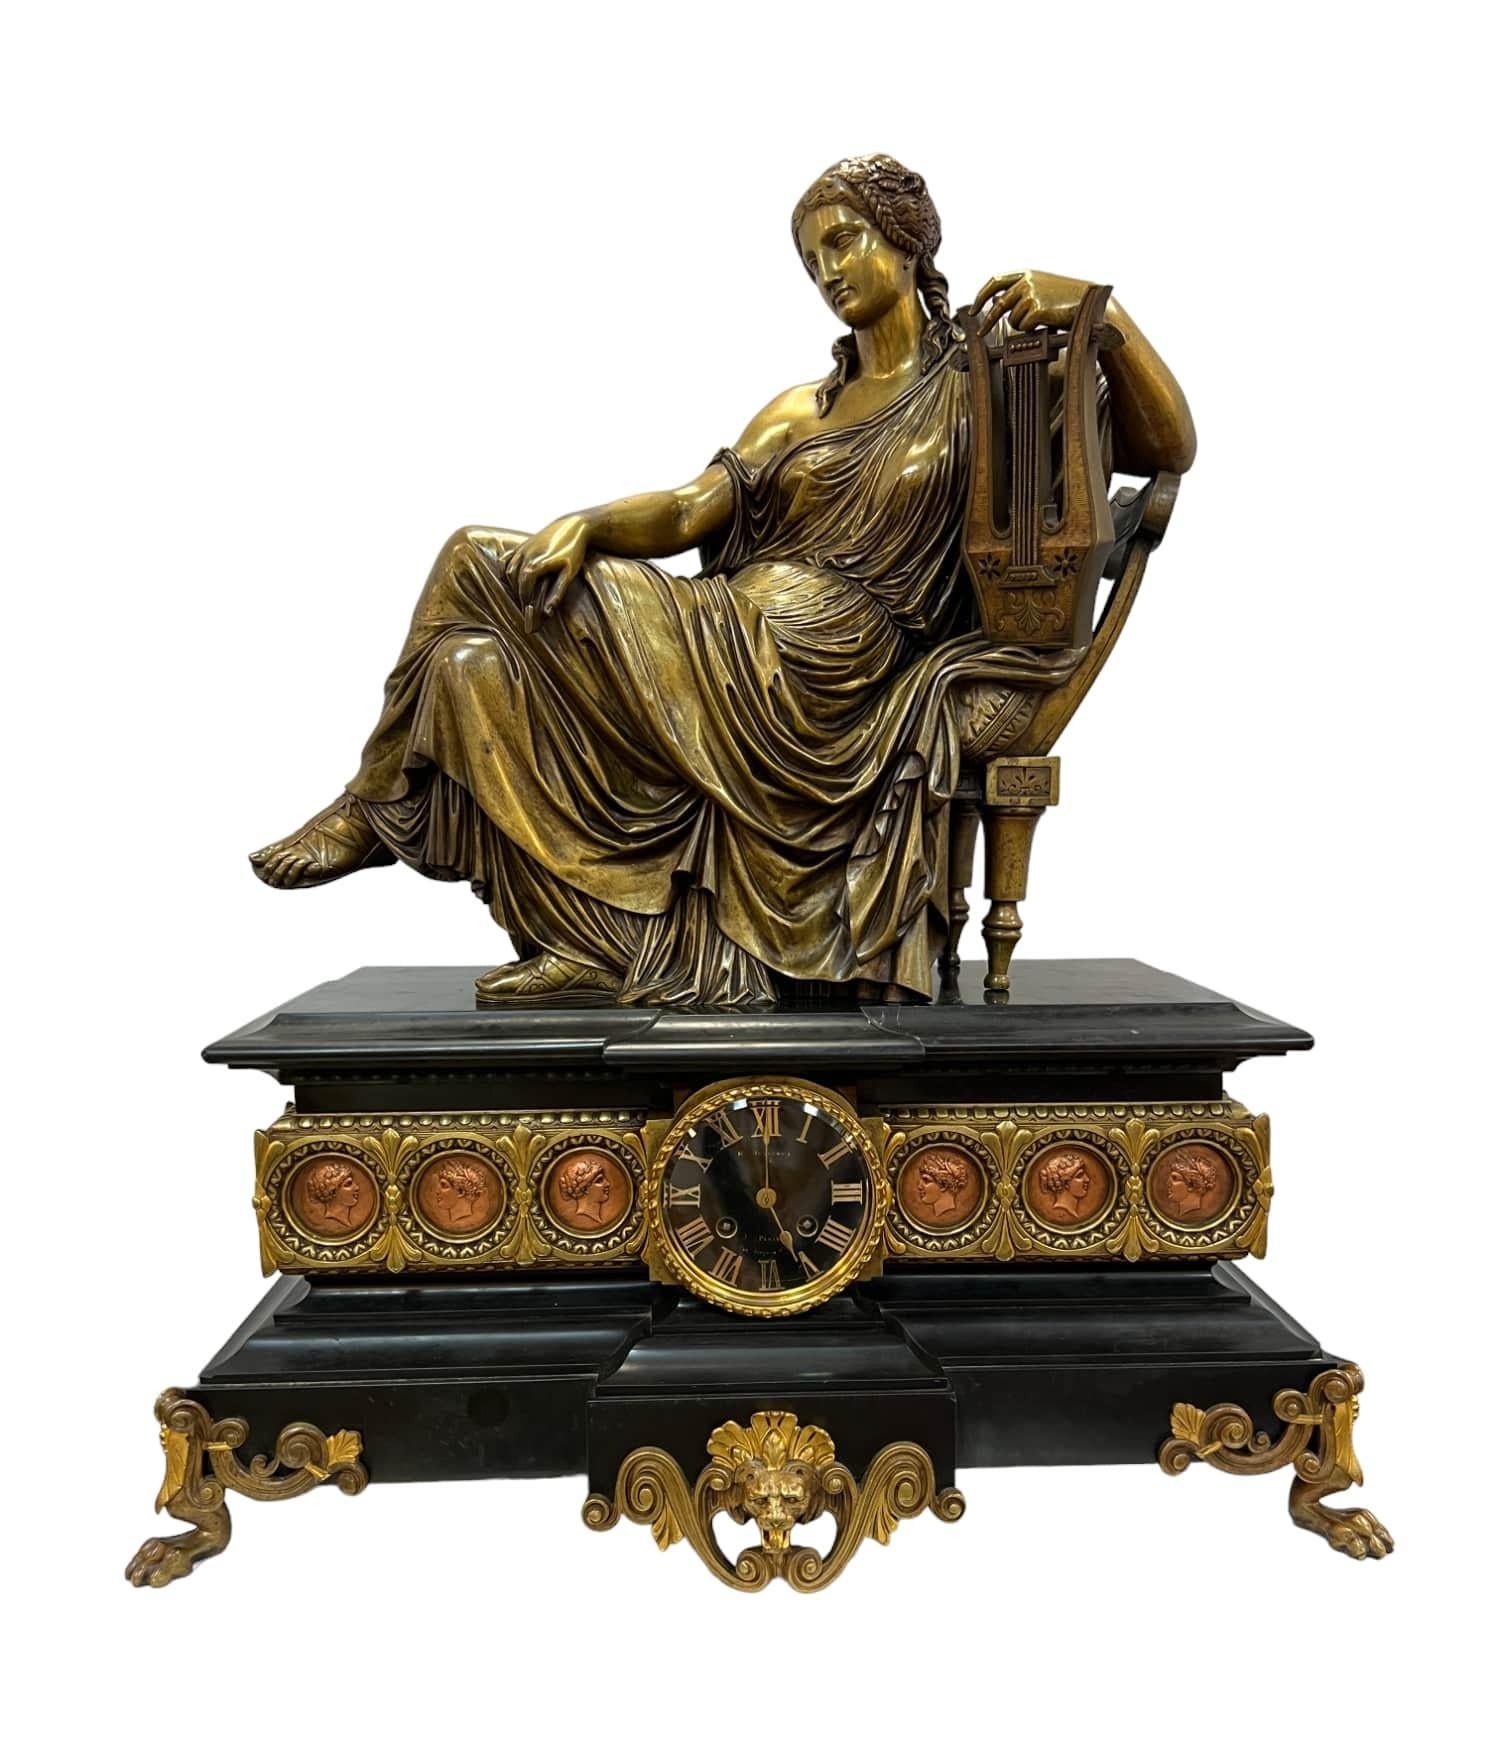 Introducing the Japy Frères et Cie Empire Mantle Clock, a remarkable timepiece with a rich history and exquisite craftsmanship. This antique clock is a true representation of the Empire style, showcasing the exceptional artistry and design prevalent